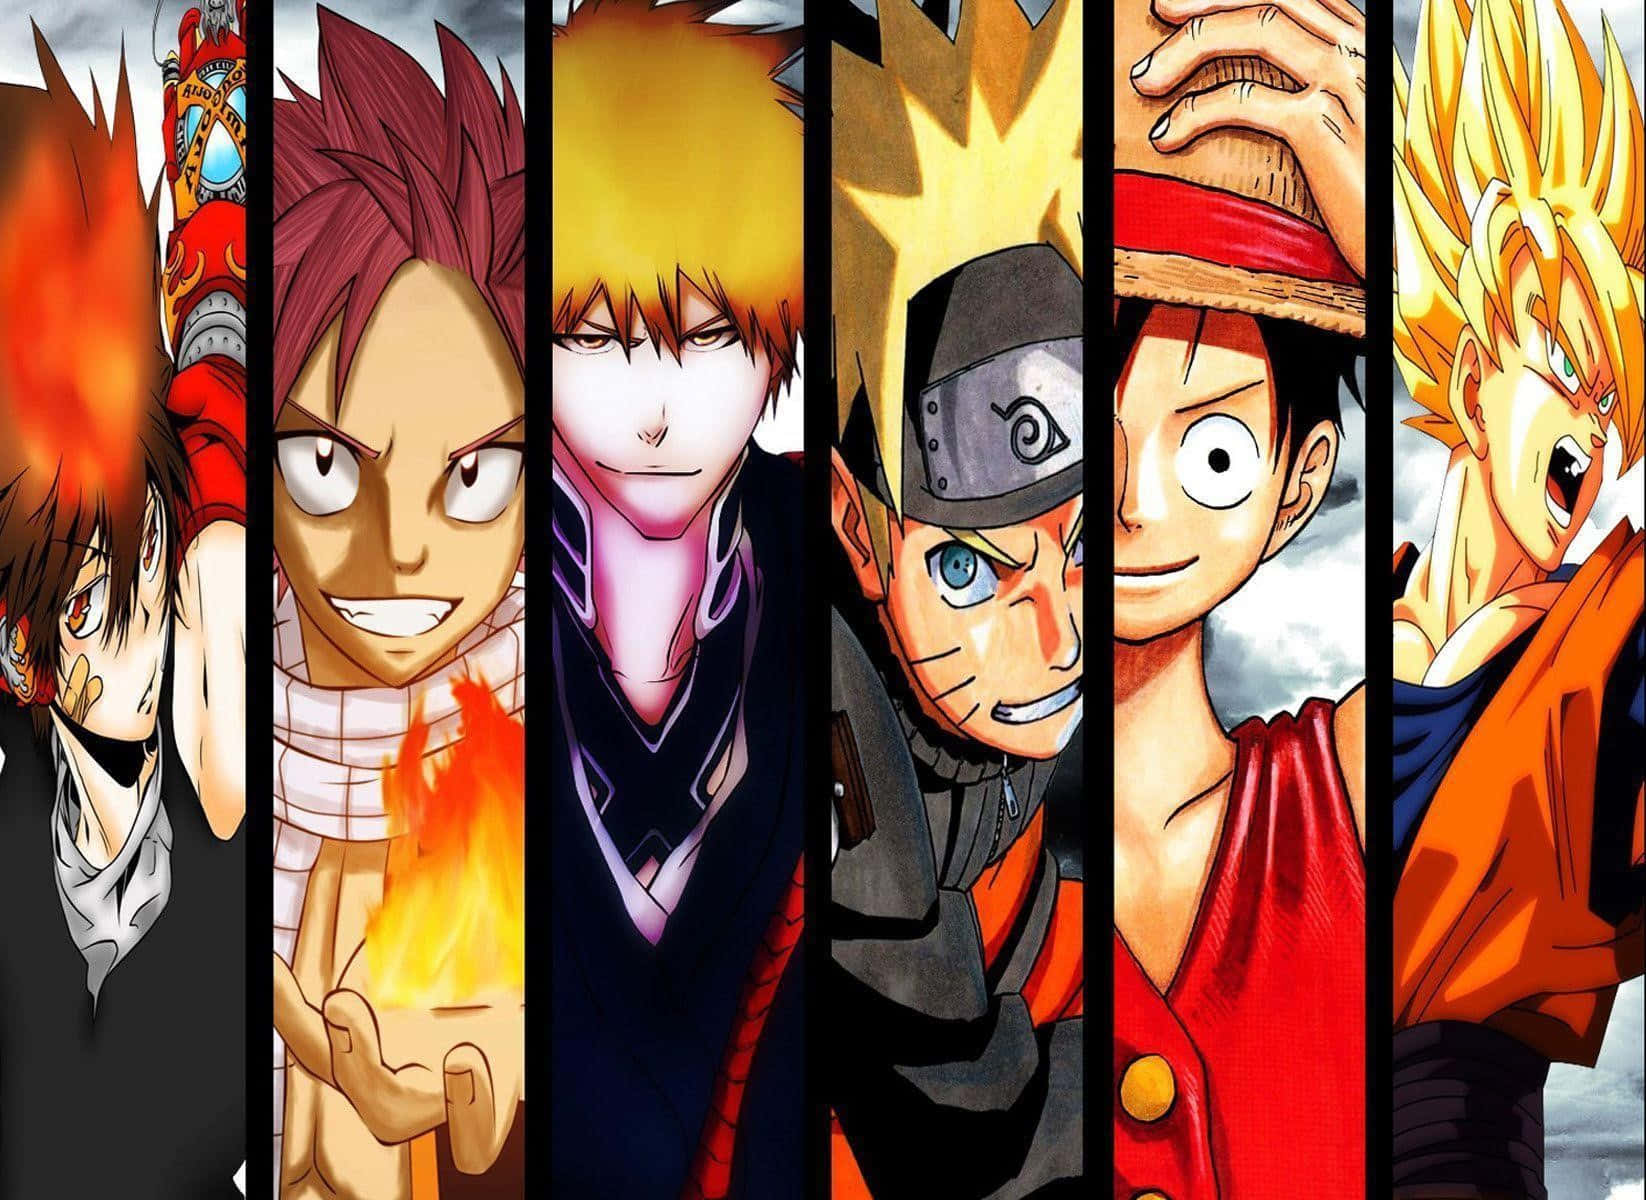 100+] Anime All Characters Hd Wallpapers